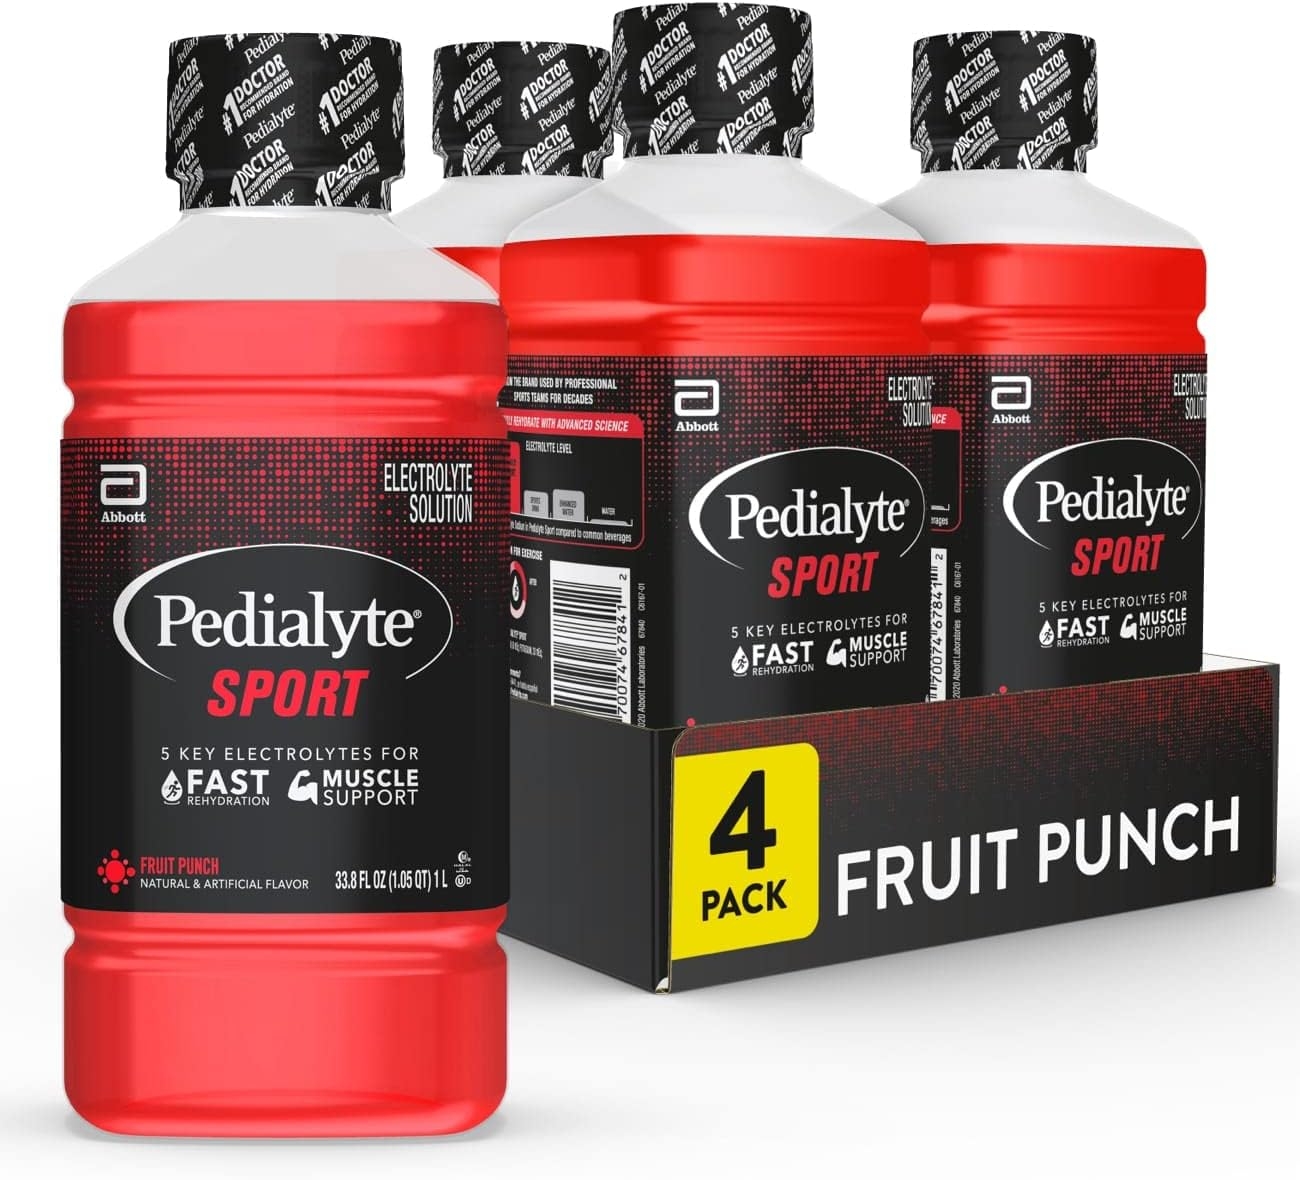 Pedialyte Sport Electrolyte Drink for Fast Hydration with 5 Key Electrolytes, Fruit Punch, 33.8 Fl Oz (Pack of 4)